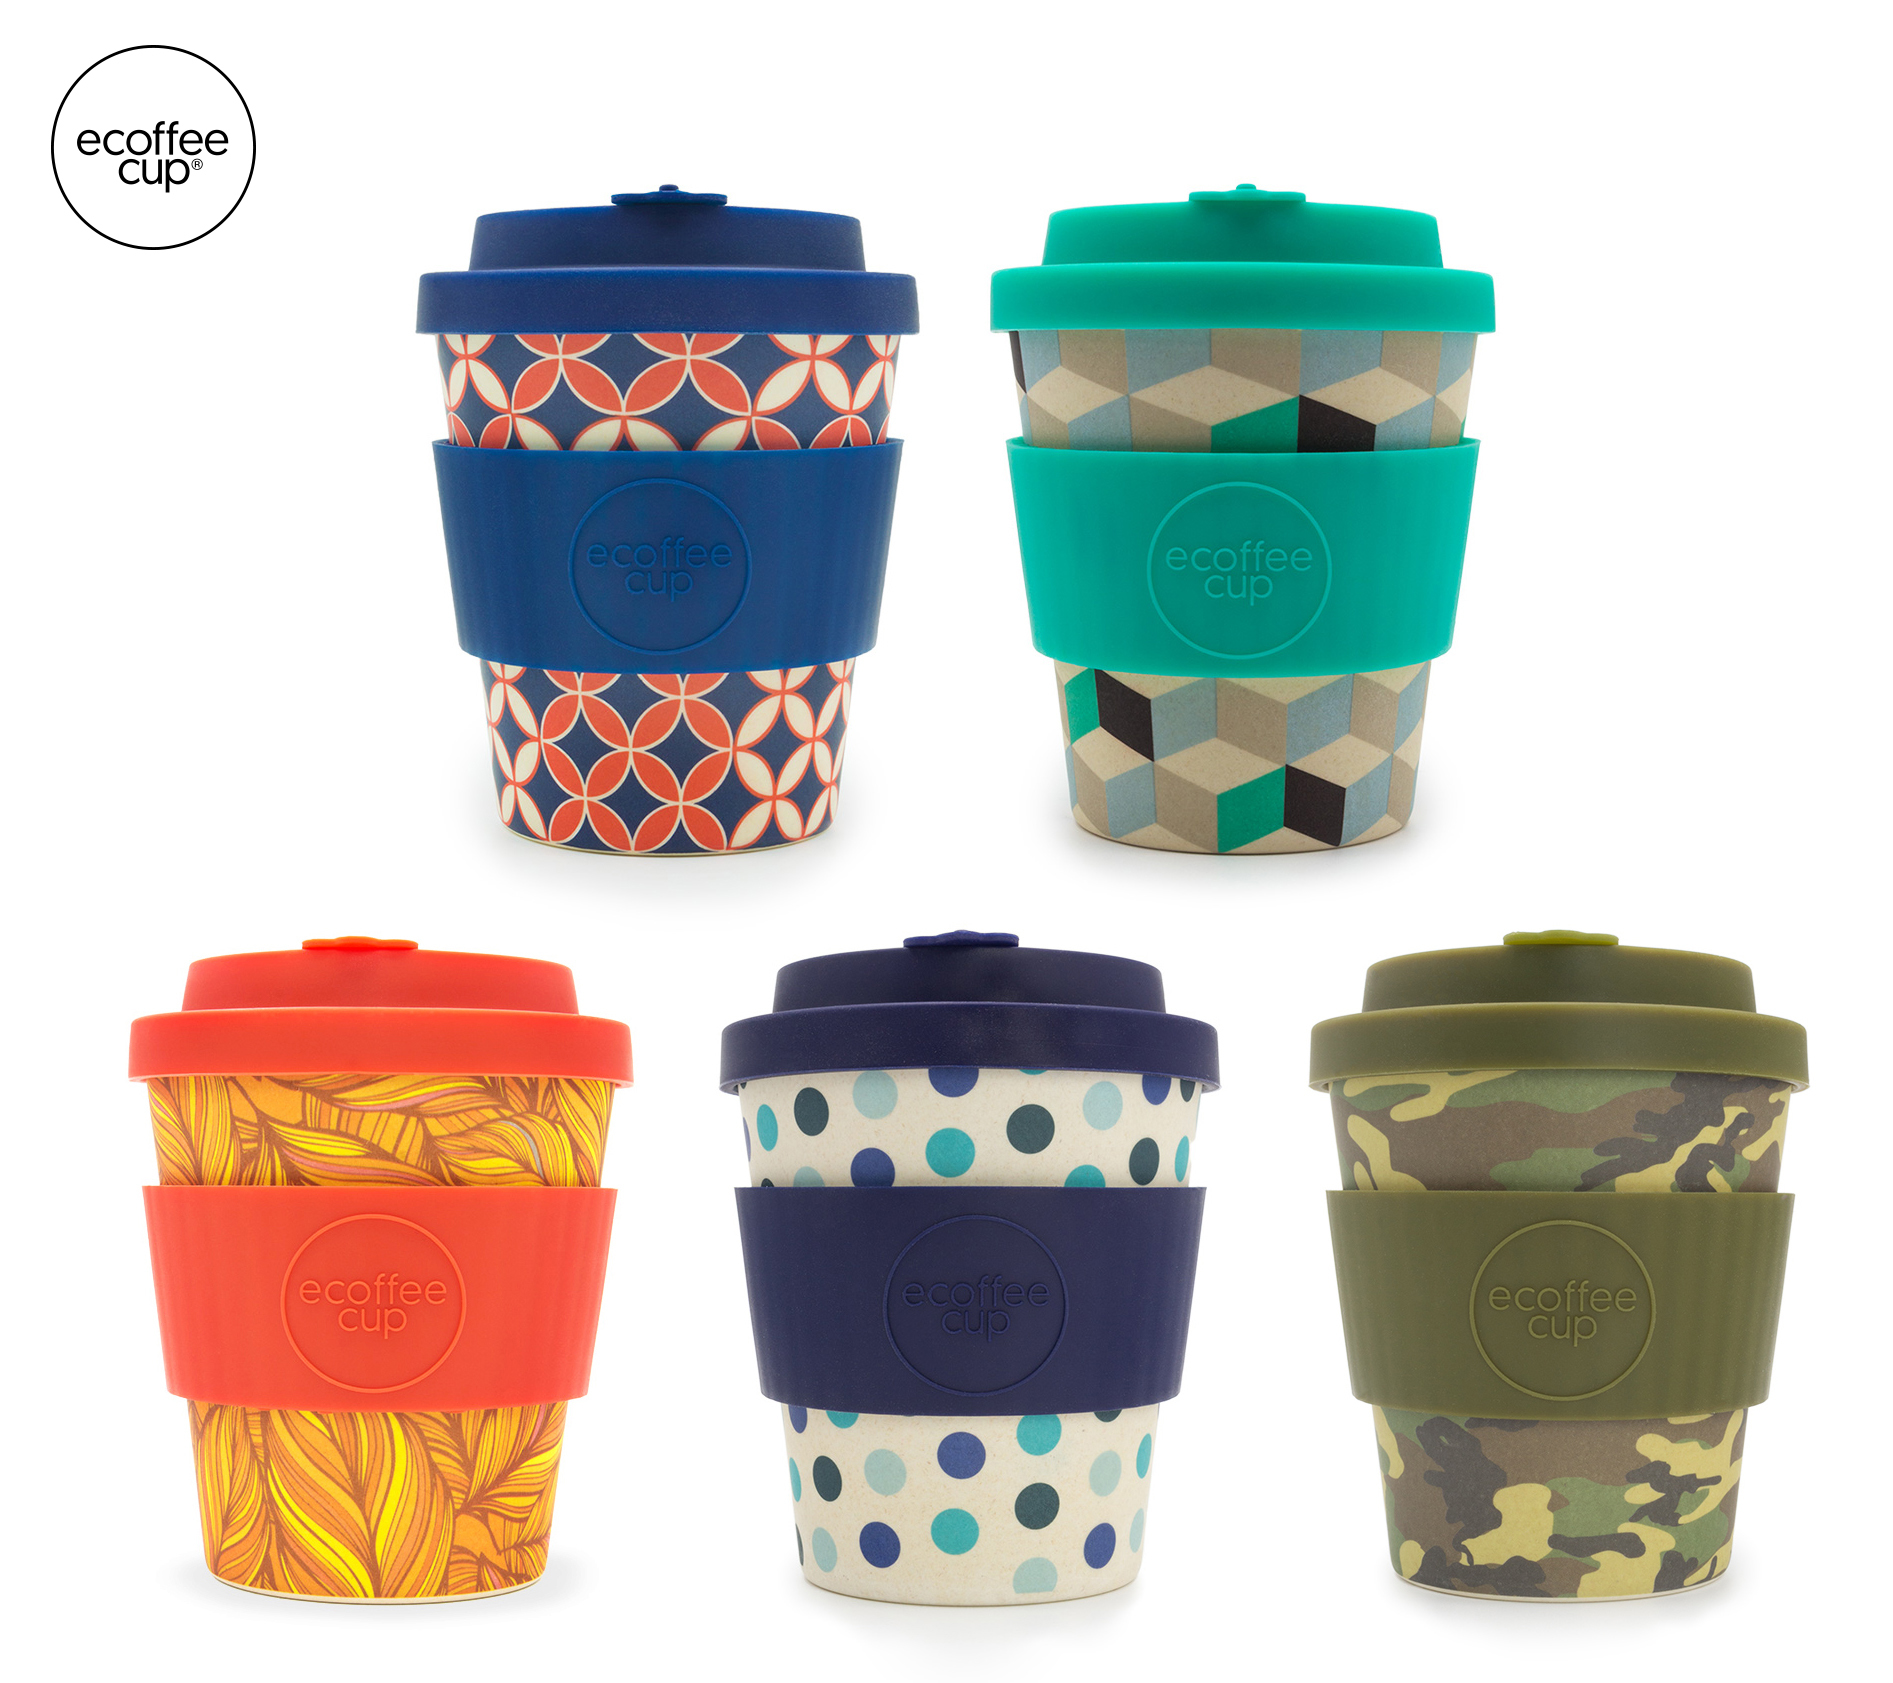 Patterned 8oz eCoffee cups with silicone bands